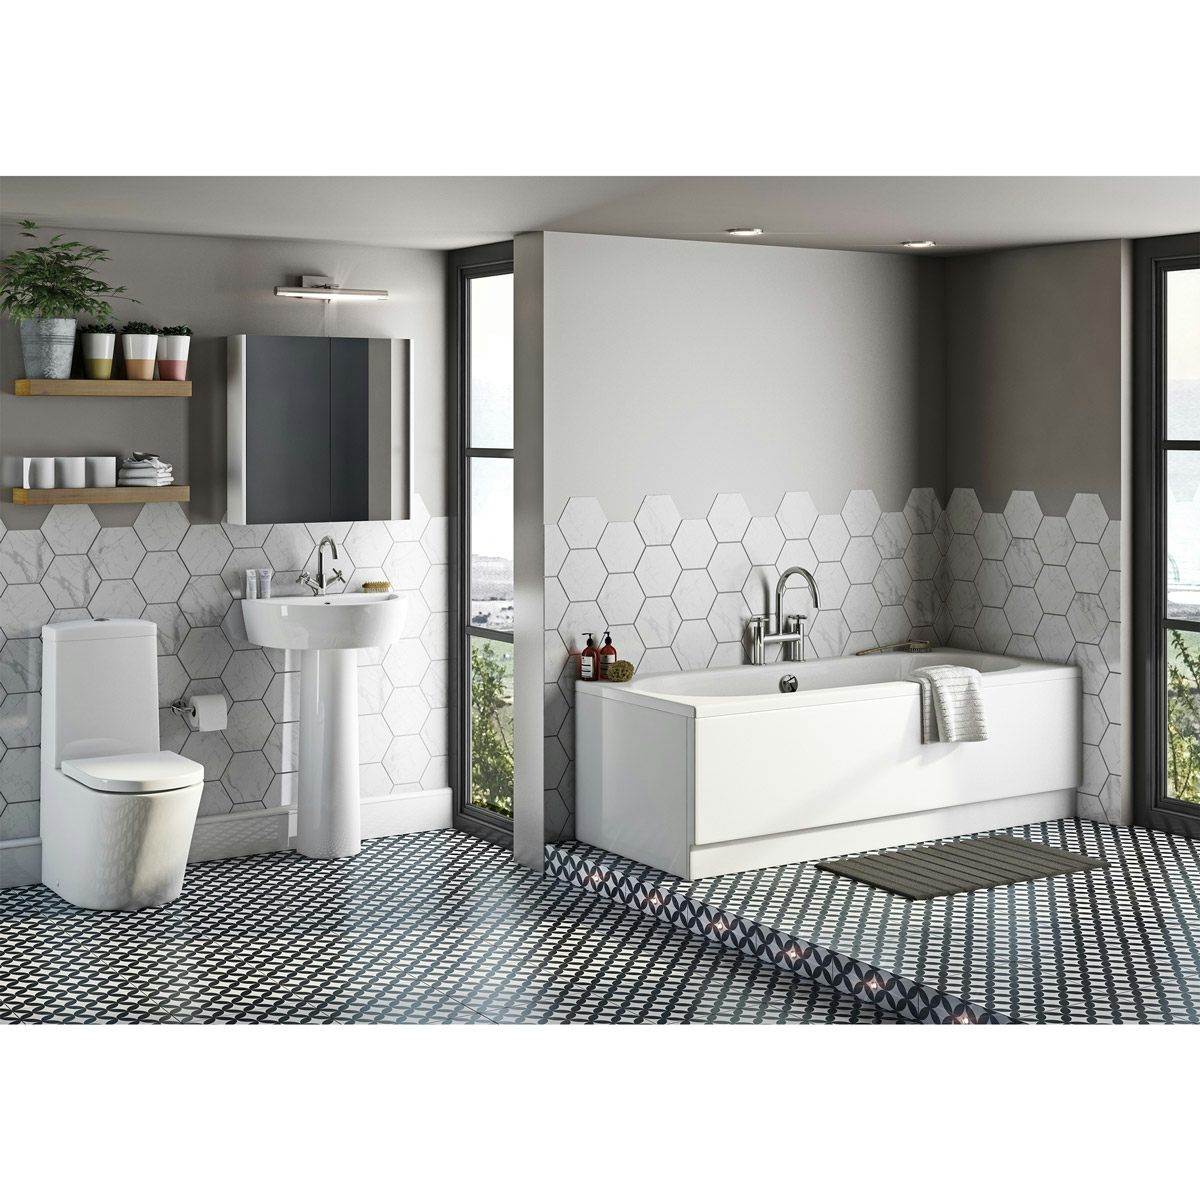 Mode Tate bathroom suite with contemporary double ended bath 1700 x 700